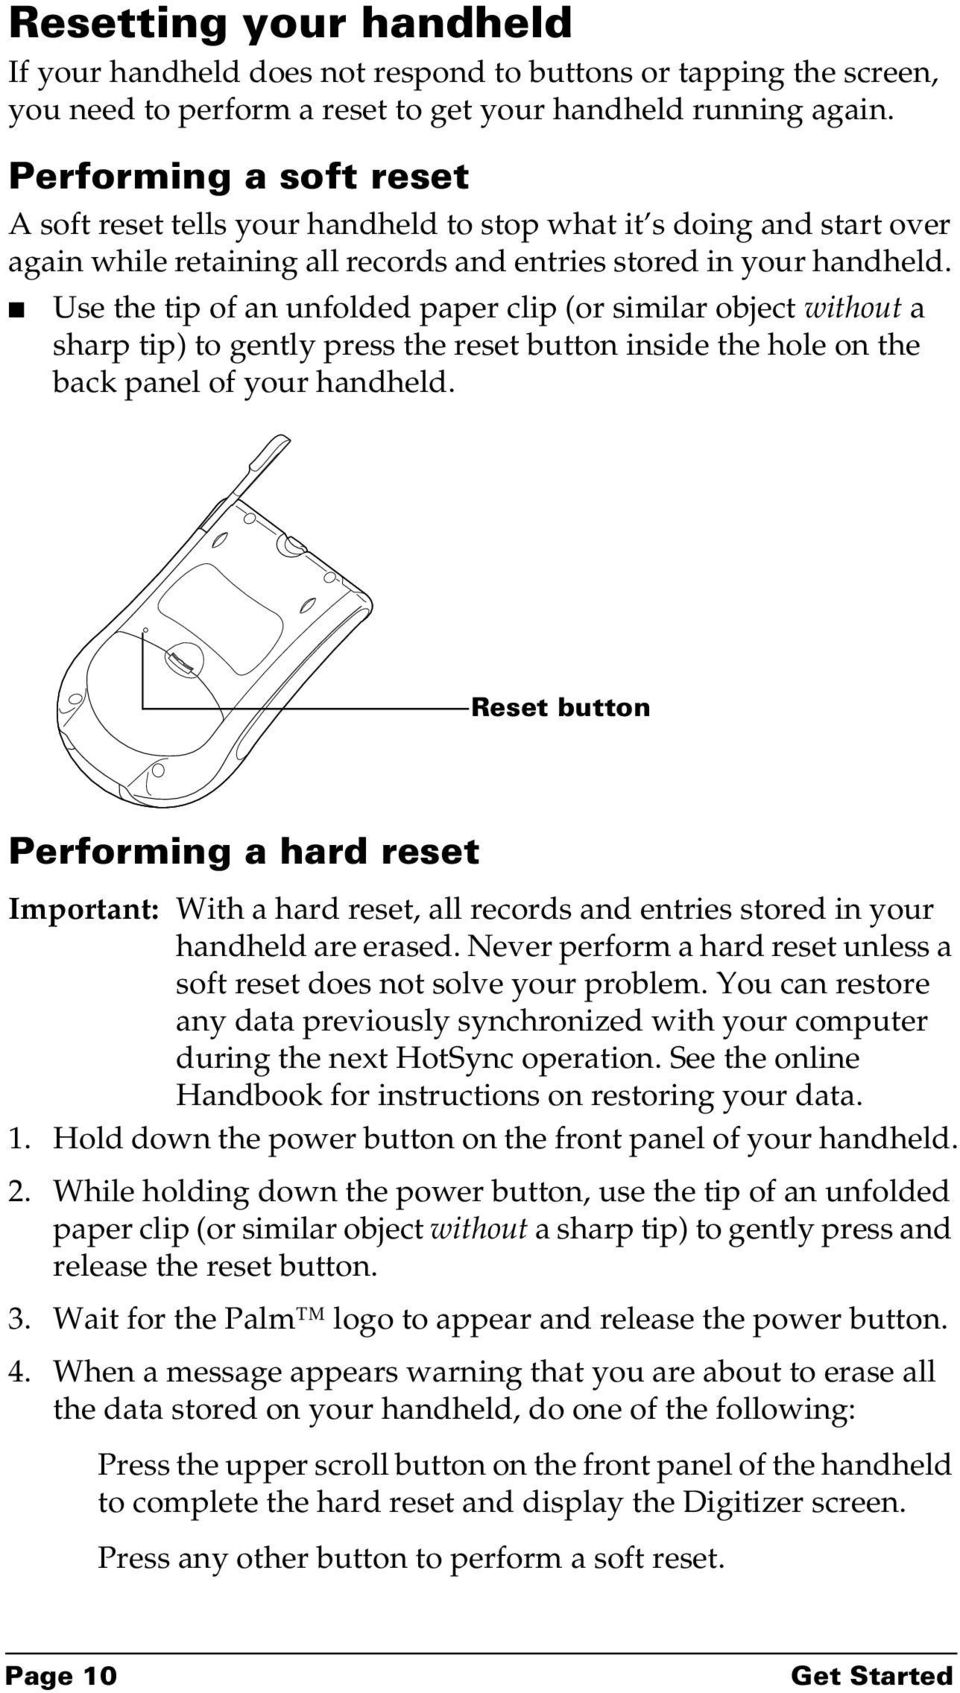 Use the tip of an unfolded paper clip (or similar object without a sharp tip) to gently press the reset button inside the hole on the back panel of your handheld.